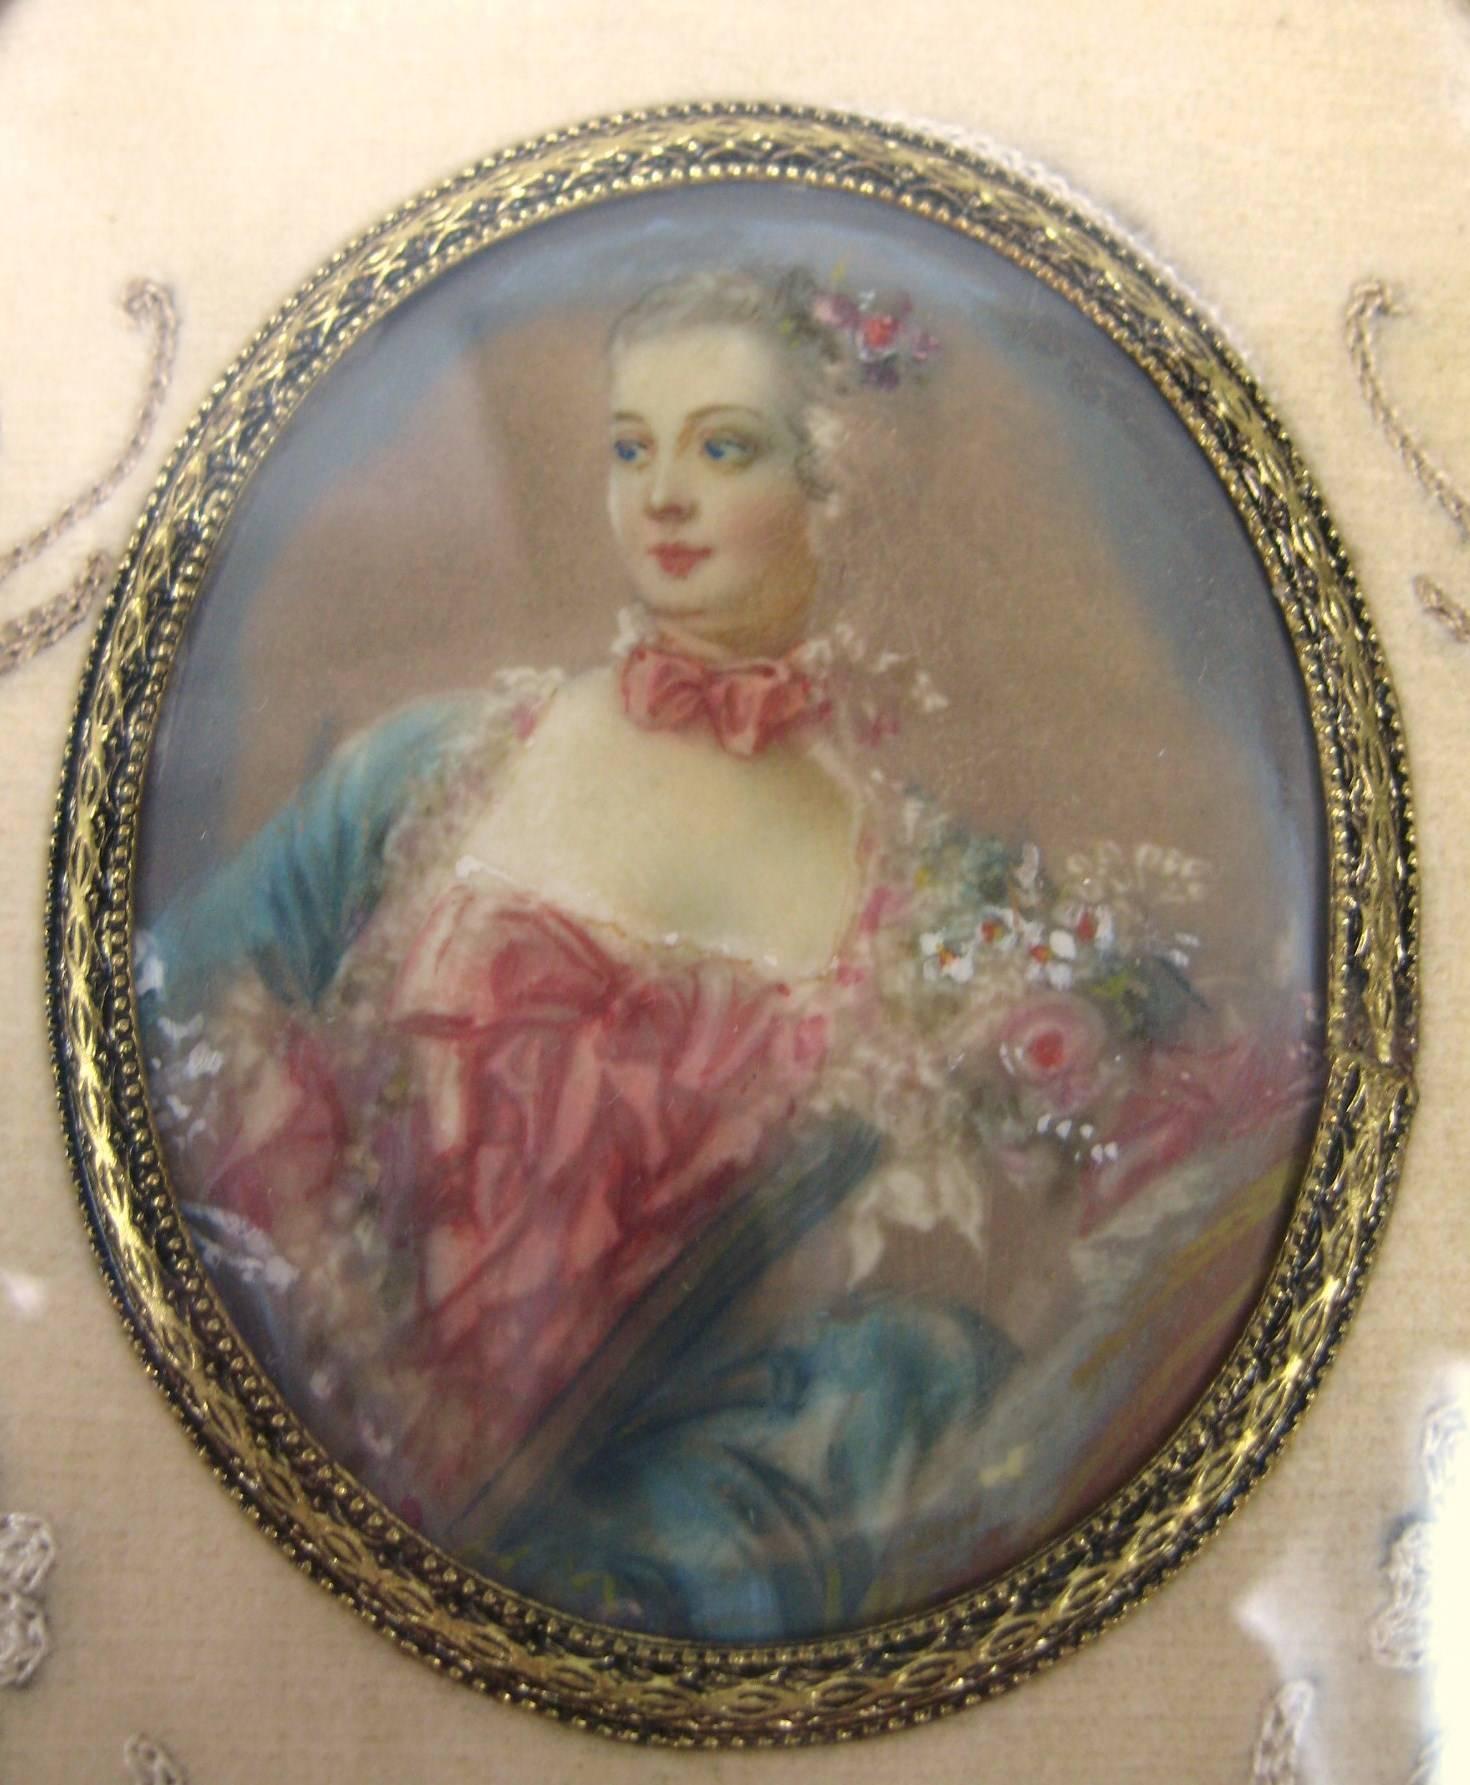 Hand painted early 19th century miniature under glass. Finely painted details on this lovely lady. In a brass oval frame, with floral embroidery surround.
Painting measures 2.5 in x 2 in
Frame measures 6.25 in x 3.75 in.